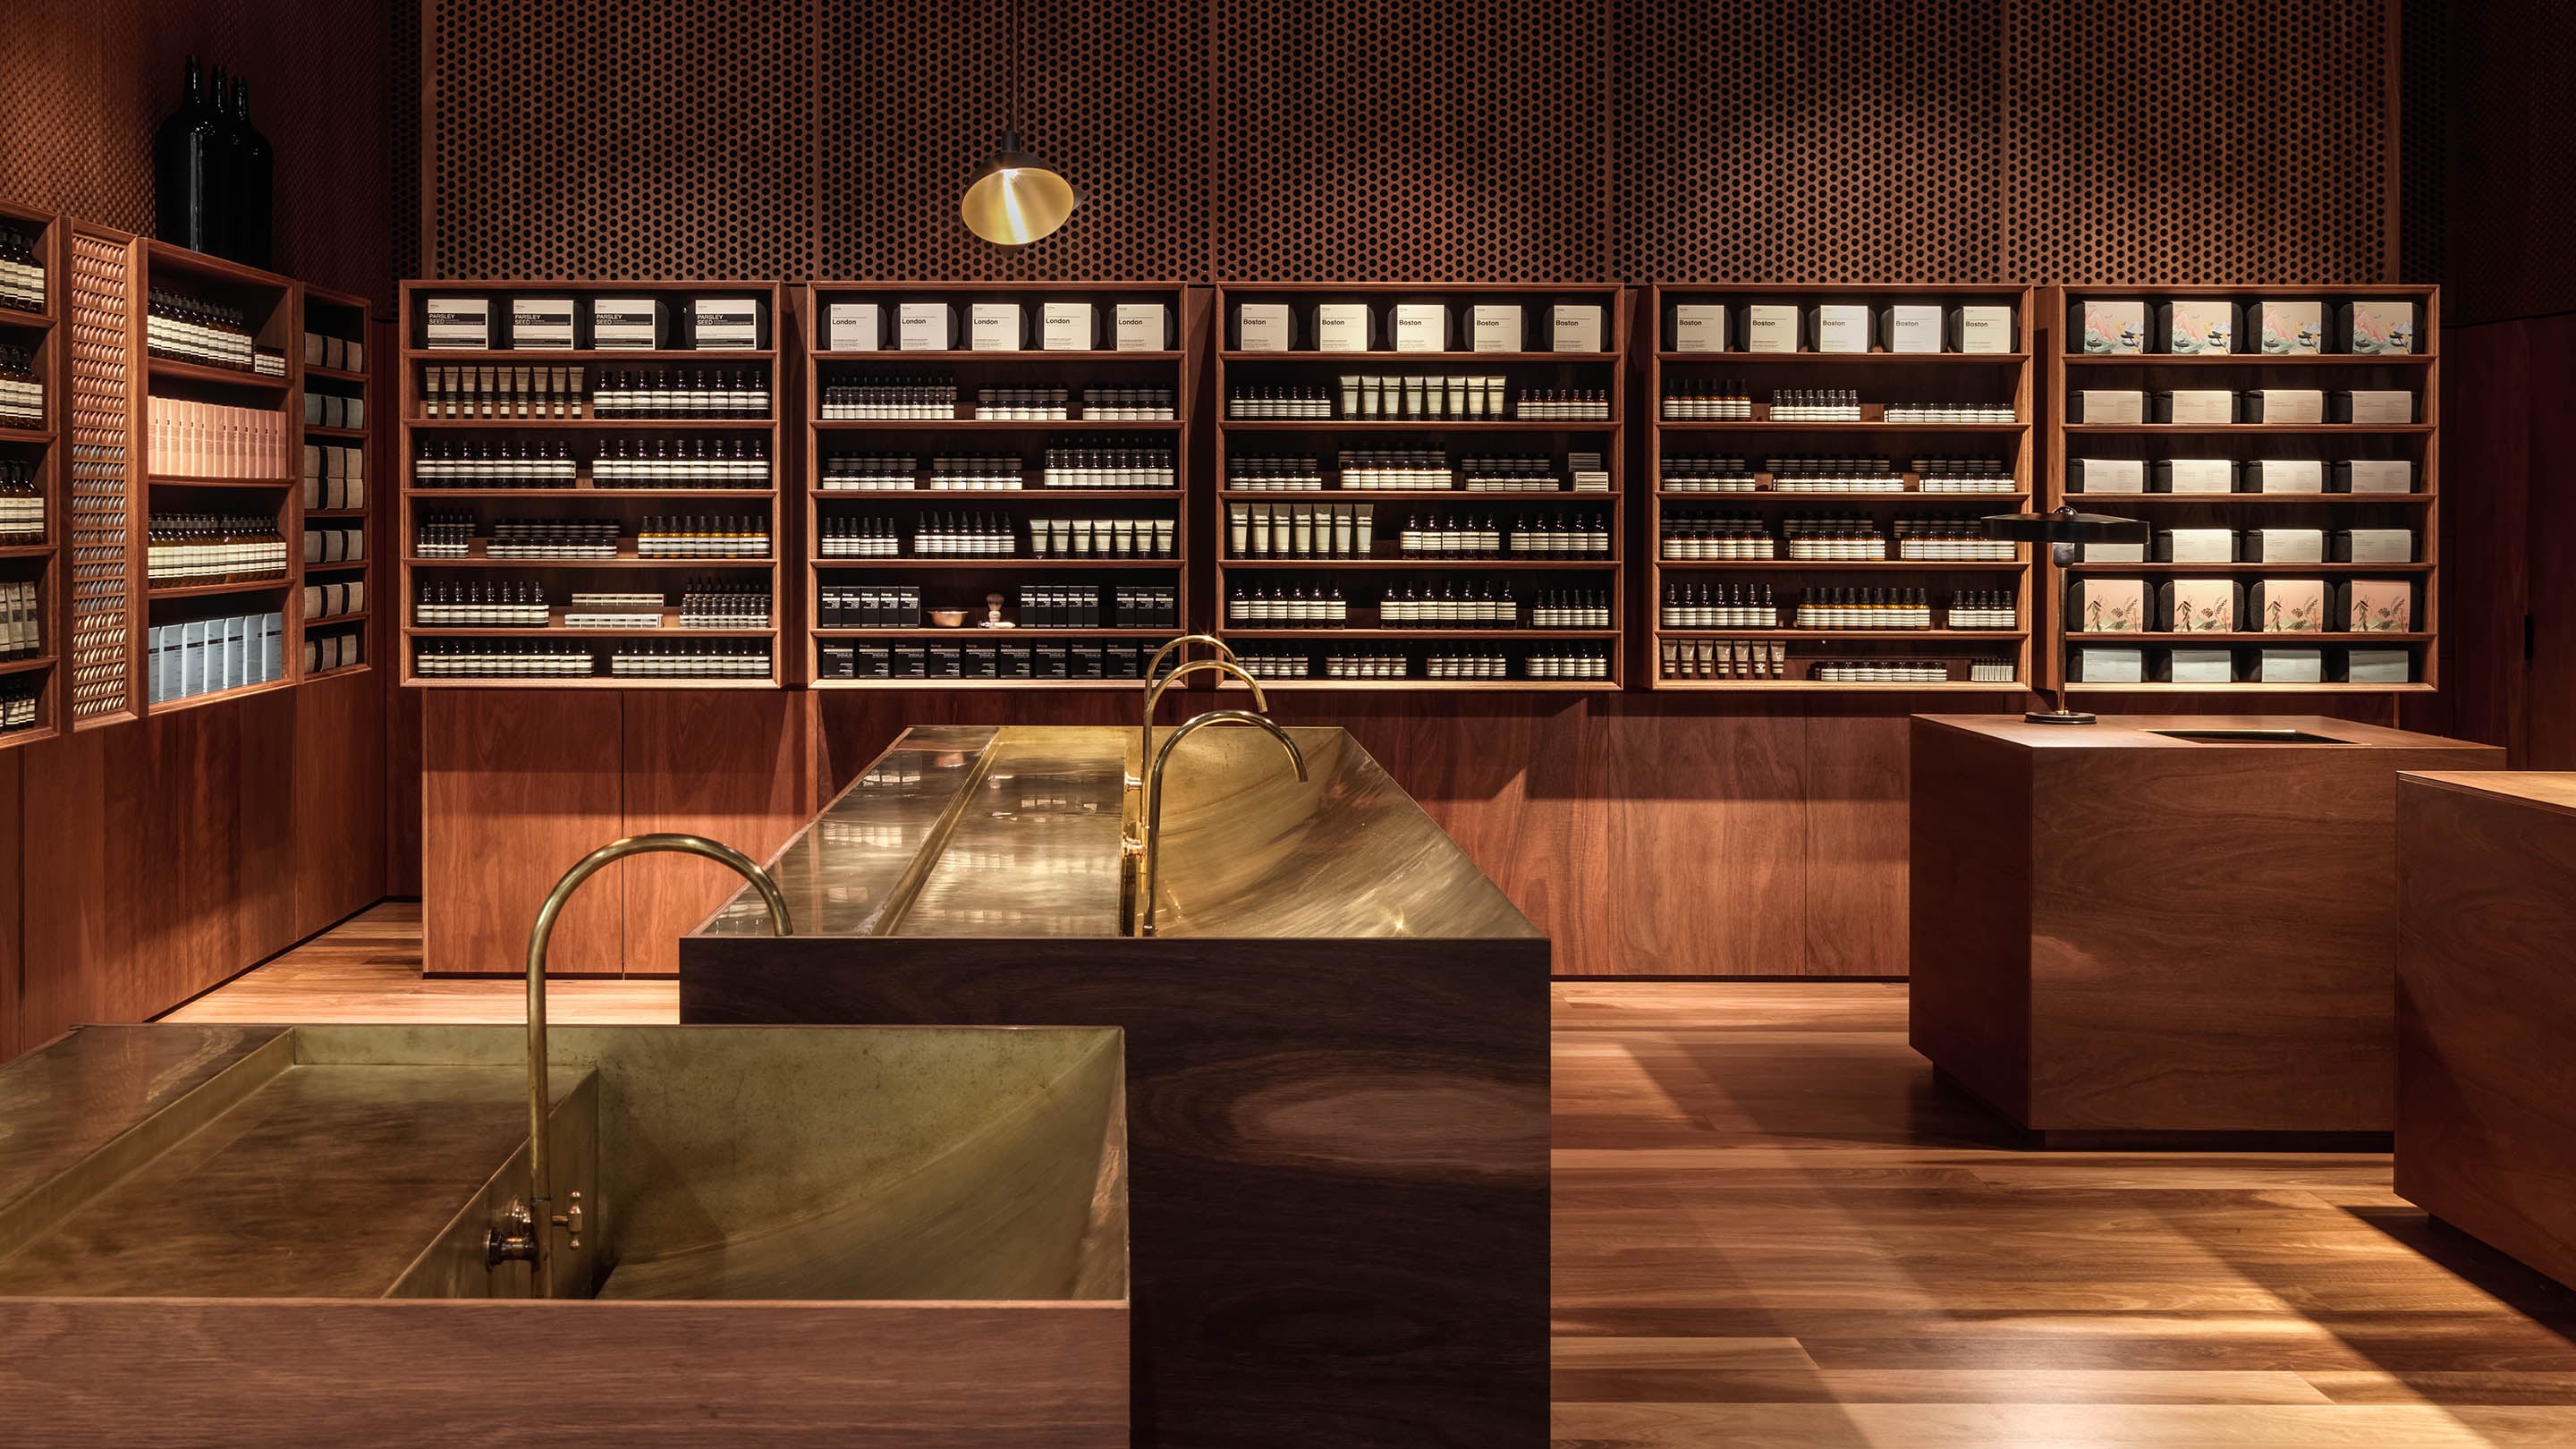 The stores interior is made from Spotted Gum flooring and shelving. The centerpiece of the store is the brass-detailed basin.